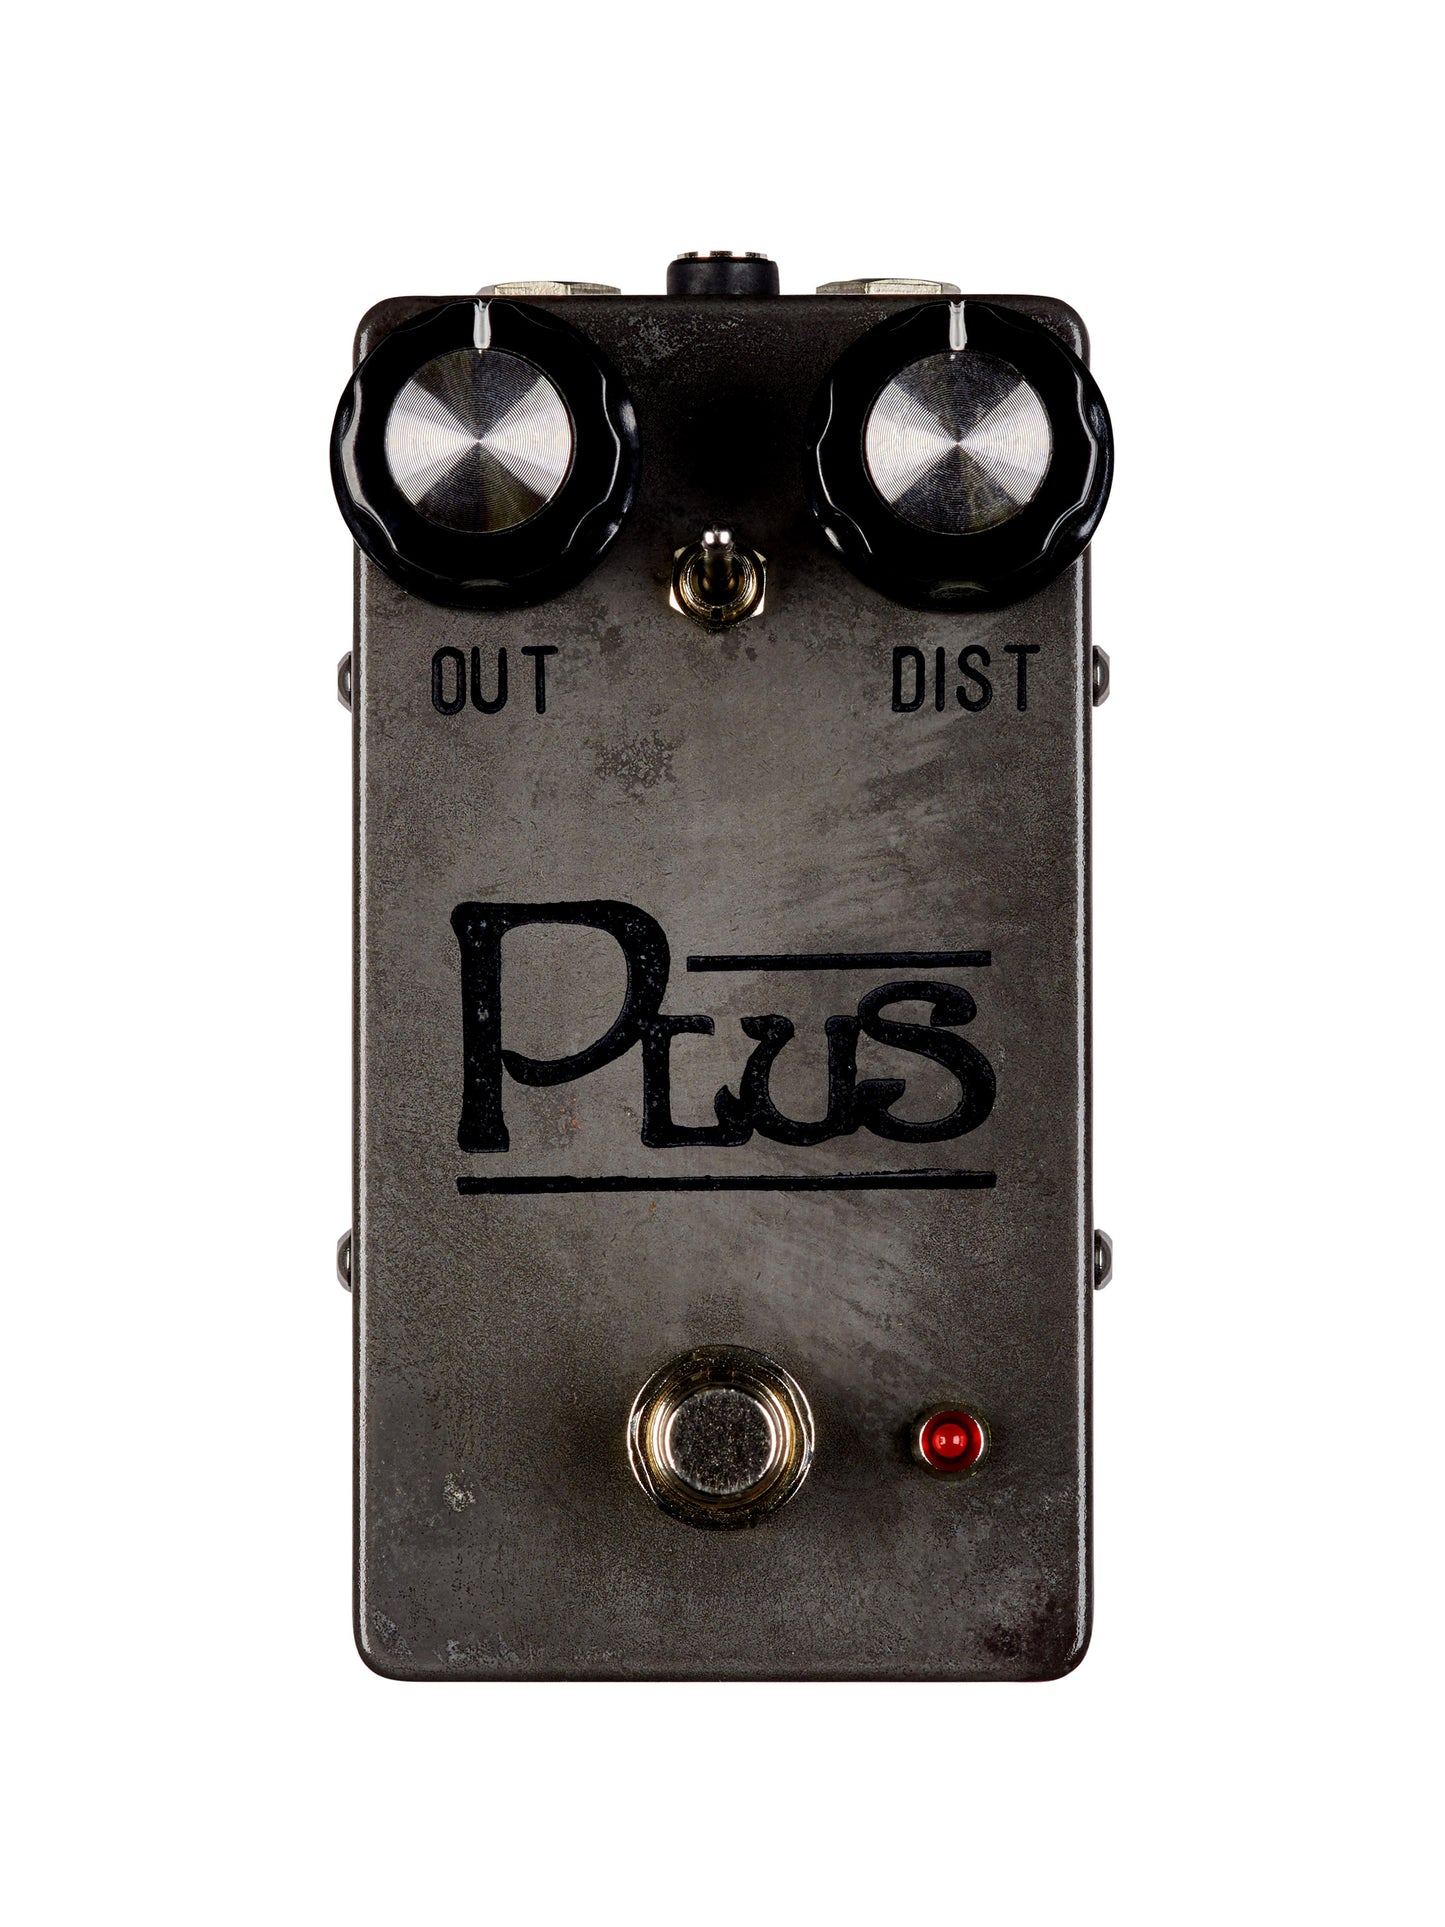 Plus Distortion - Classic 70s distortion with vintage metal can op amp